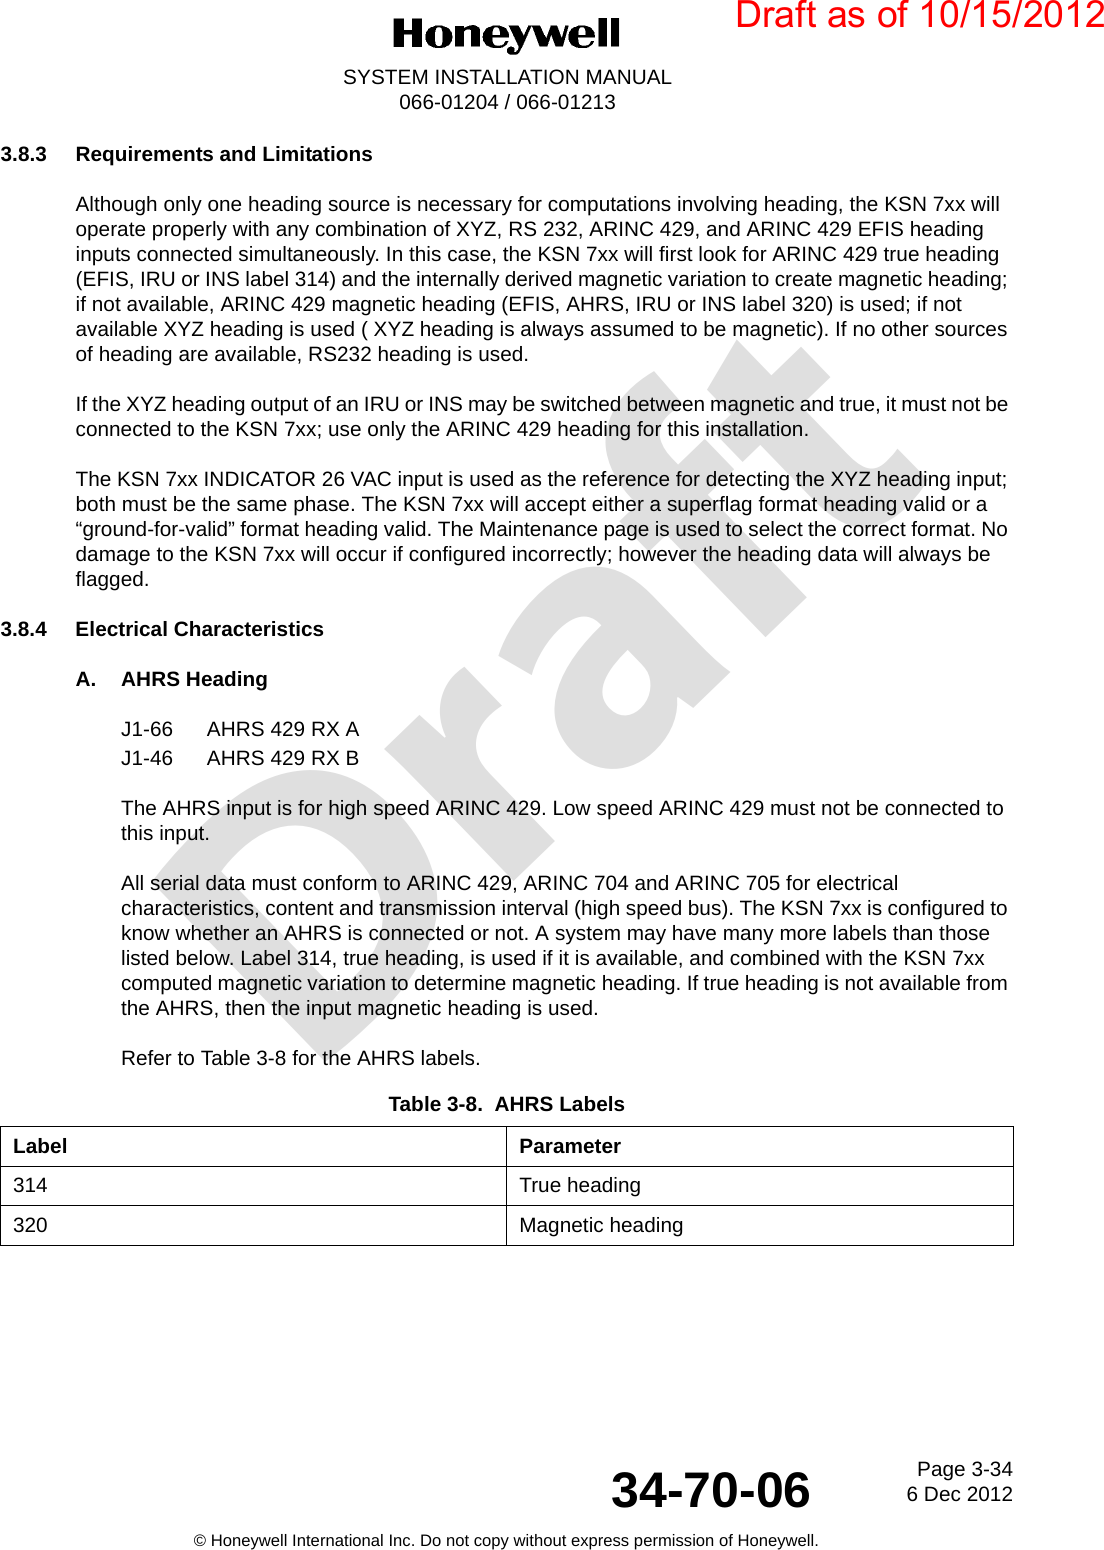 DraftPage 3-346 Dec 201234-70-06SYSTEM INSTALLATION MANUAL066-01204 / 066-01213© Honeywell International Inc. Do not copy without express permission of Honeywell.3.8.3 Requirements and LimitationsAlthough only one heading source is necessary for computations involving heading, the KSN 7xx will operate properly with any combination of XYZ, RS 232, ARINC 429, and ARINC 429 EFIS heading inputs connected simultaneously. In this case, the KSN 7xx will first look for ARINC 429 true heading (EFIS, IRU or INS label 314) and the internally derived magnetic variation to create magnetic heading; if not available, ARINC 429 magnetic heading (EFIS, AHRS, IRU or INS label 320) is used; if not available XYZ heading is used ( XYZ heading is always assumed to be magnetic). If no other sources of heading are available, RS232 heading is used.If the XYZ heading output of an IRU or INS may be switched between magnetic and true, it must not be connected to the KSN 7xx; use only the ARINC 429 heading for this installation.The KSN 7xx INDICATOR 26 VAC input is used as the reference for detecting the XYZ heading input; both must be the same phase. The KSN 7xx will accept either a superflag format heading valid or a “ground-for-valid” format heading valid. The Maintenance page is used to select the correct format. No damage to the KSN 7xx will occur if configured incorrectly; however the heading data will always be flagged.3.8.4 Electrical CharacteristicsA. AHRS HeadingJ1-66 AHRS 429 RX AJ1-46 AHRS 429 RX BThe AHRS input is for high speed ARINC 429. Low speed ARINC 429 must not be connected to this input.All serial data must conform to ARINC 429, ARINC 704 and ARINC 705 for electrical characteristics, content and transmission interval (high speed bus). The KSN 7xx is configured to know whether an AHRS is connected or not. A system may have many more labels than those listed below. Label 314, true heading, is used if it is available, and combined with the KSN 7xx computed magnetic variation to determine magnetic heading. If true heading is not available from the AHRS, then the input magnetic heading is used.Refer to Table 3-8 for the AHRS labels.Table 3-8.  AHRS LabelsLabel Parameter314 True heading320 Magnetic headingDraft as of 10/15/2012